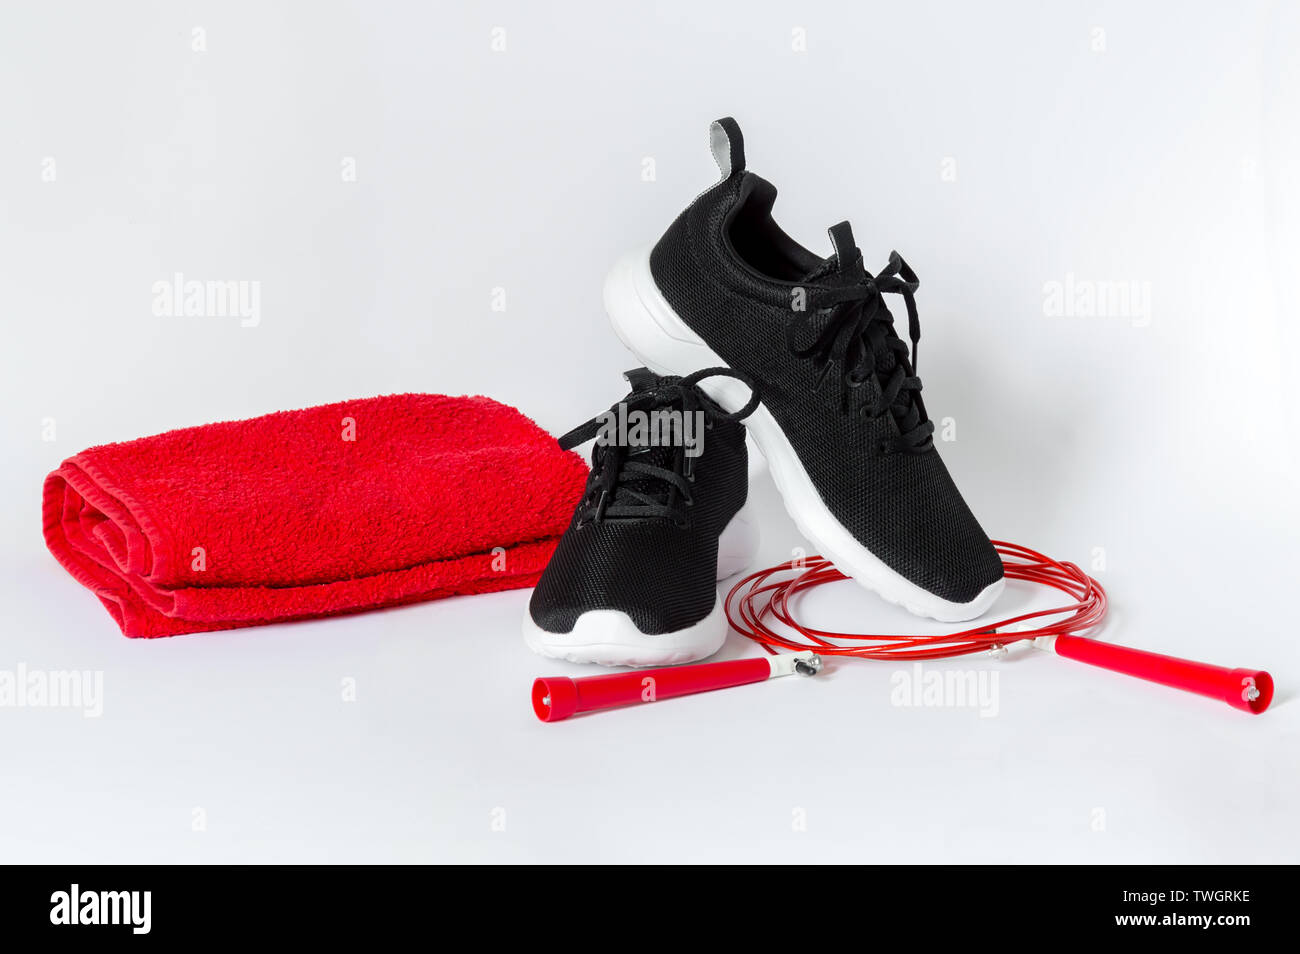 Black sports running shoes with white sole, red jumping rope and red towel isolated on white background. Concept of fitness and healthy lifestyle Stock Photo